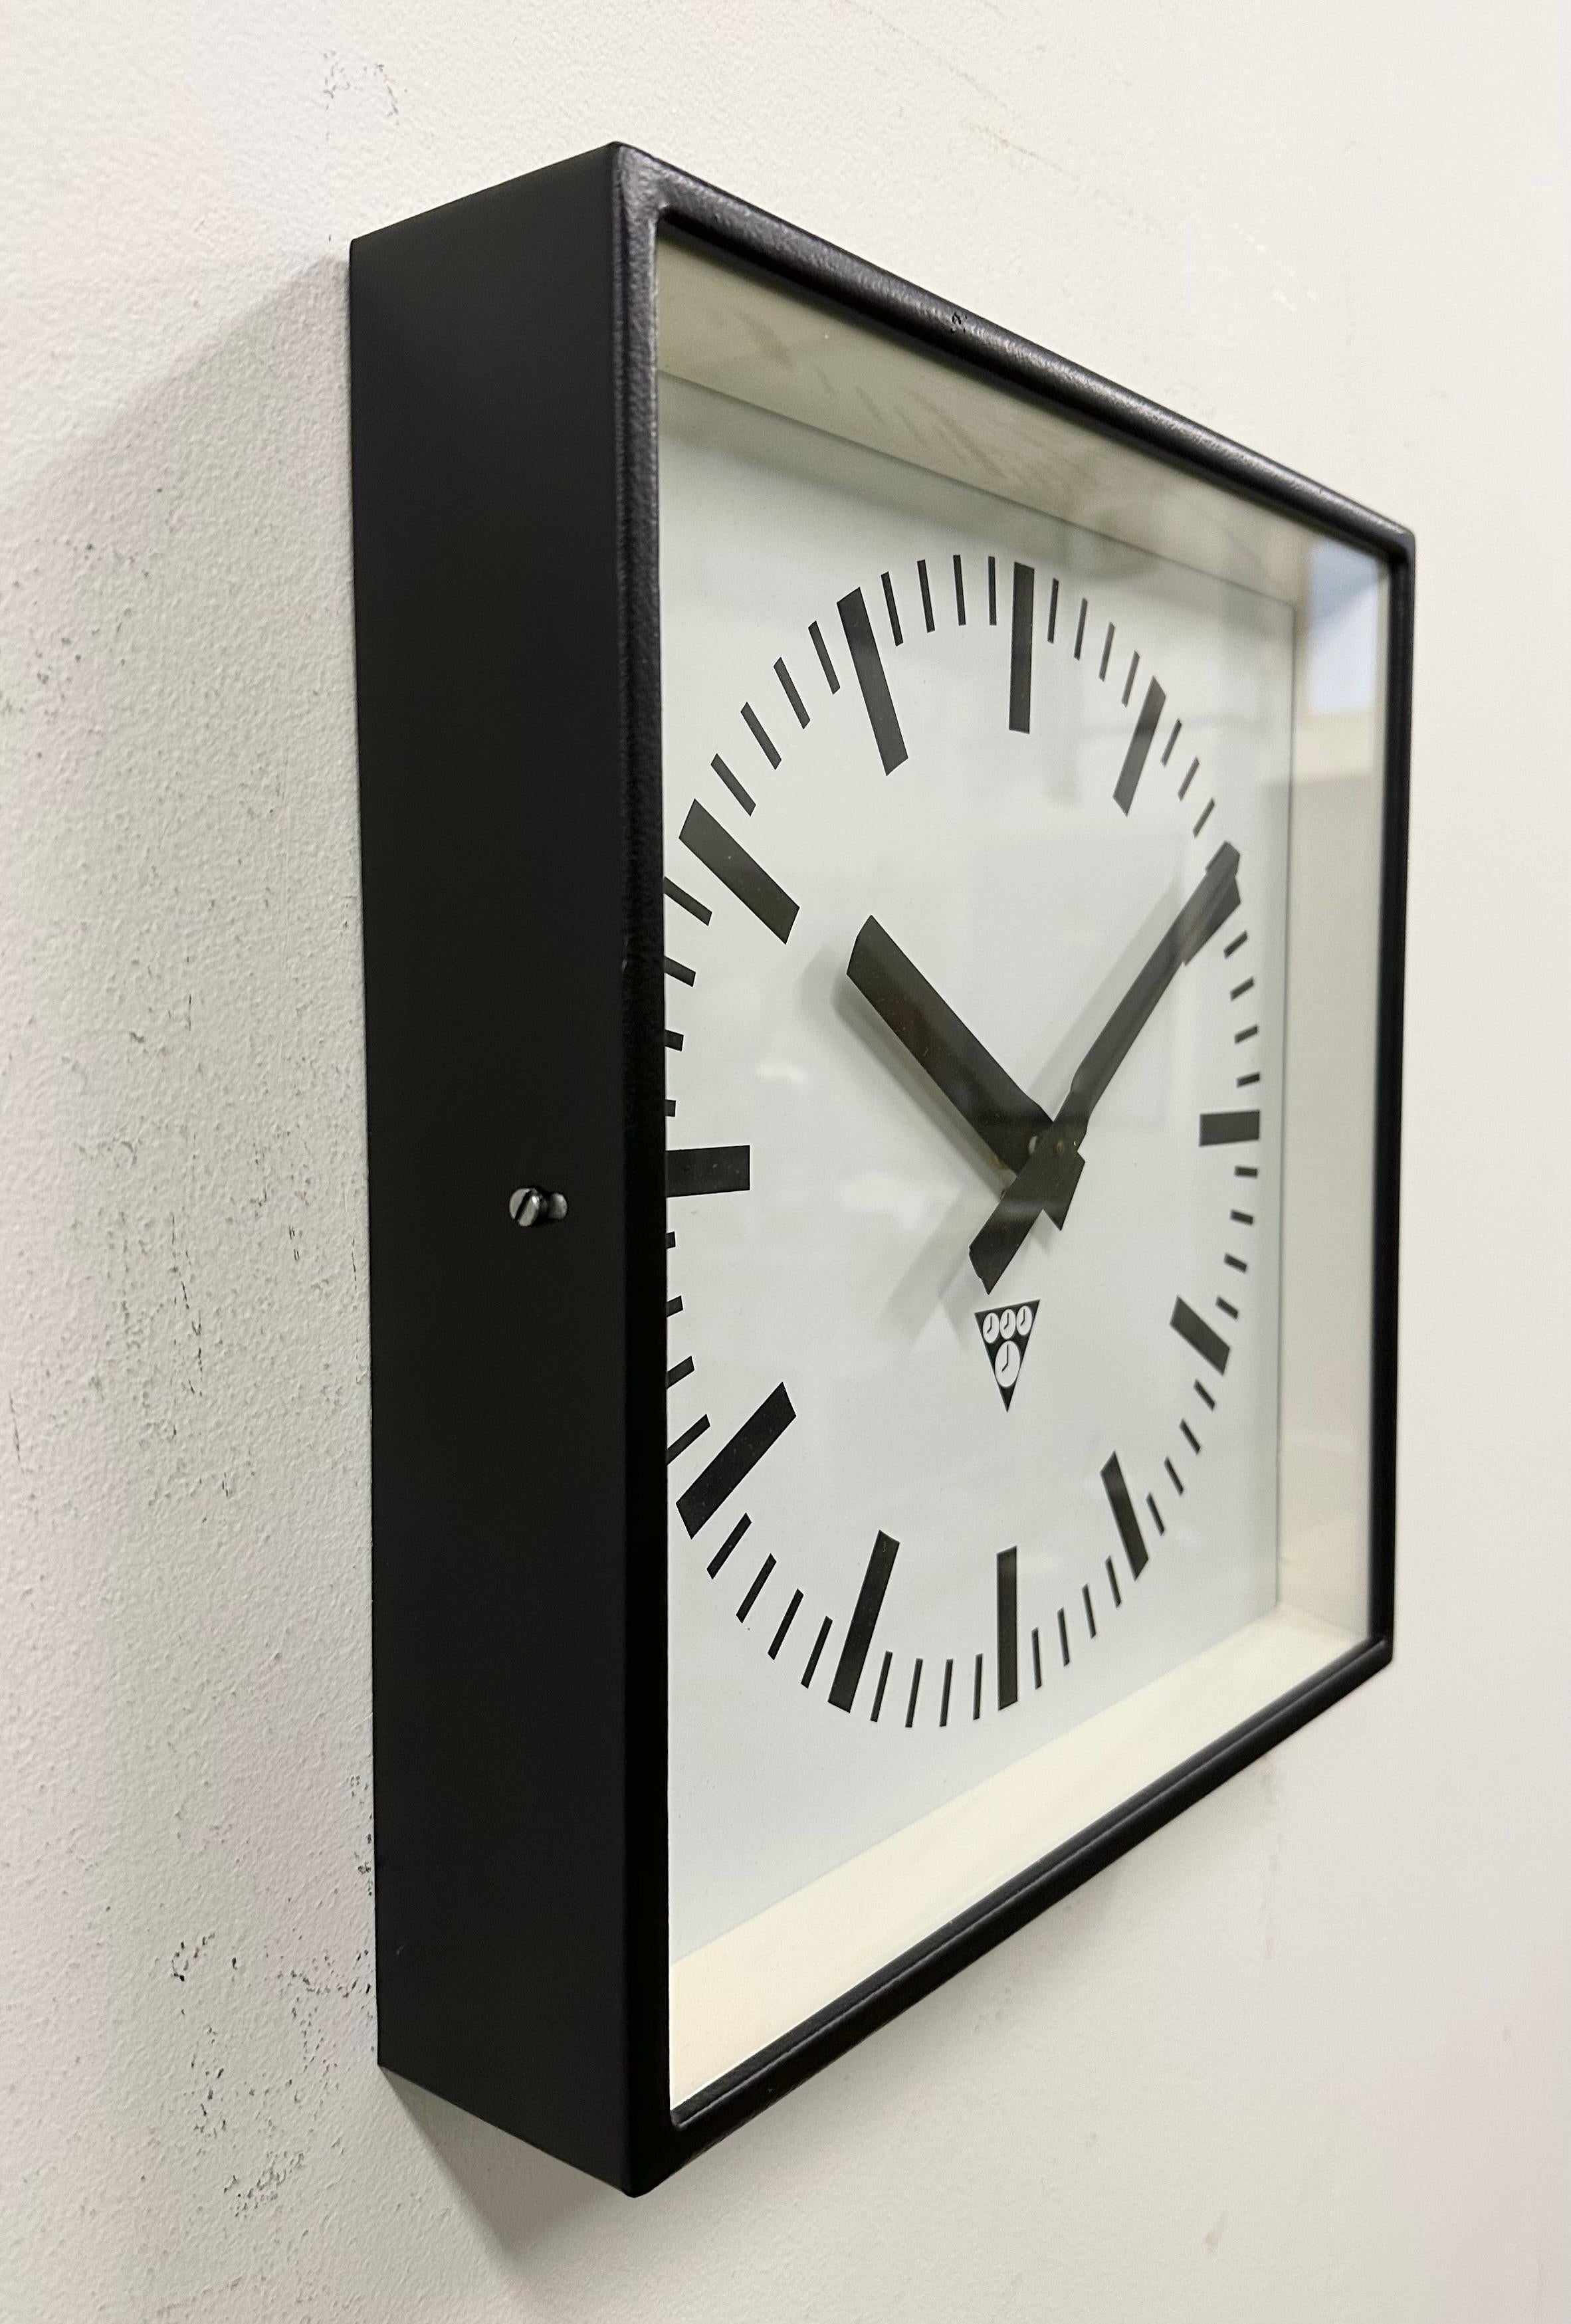 Czech Black Industrial Square Wall Clock from Pragotron, 1970s For Sale